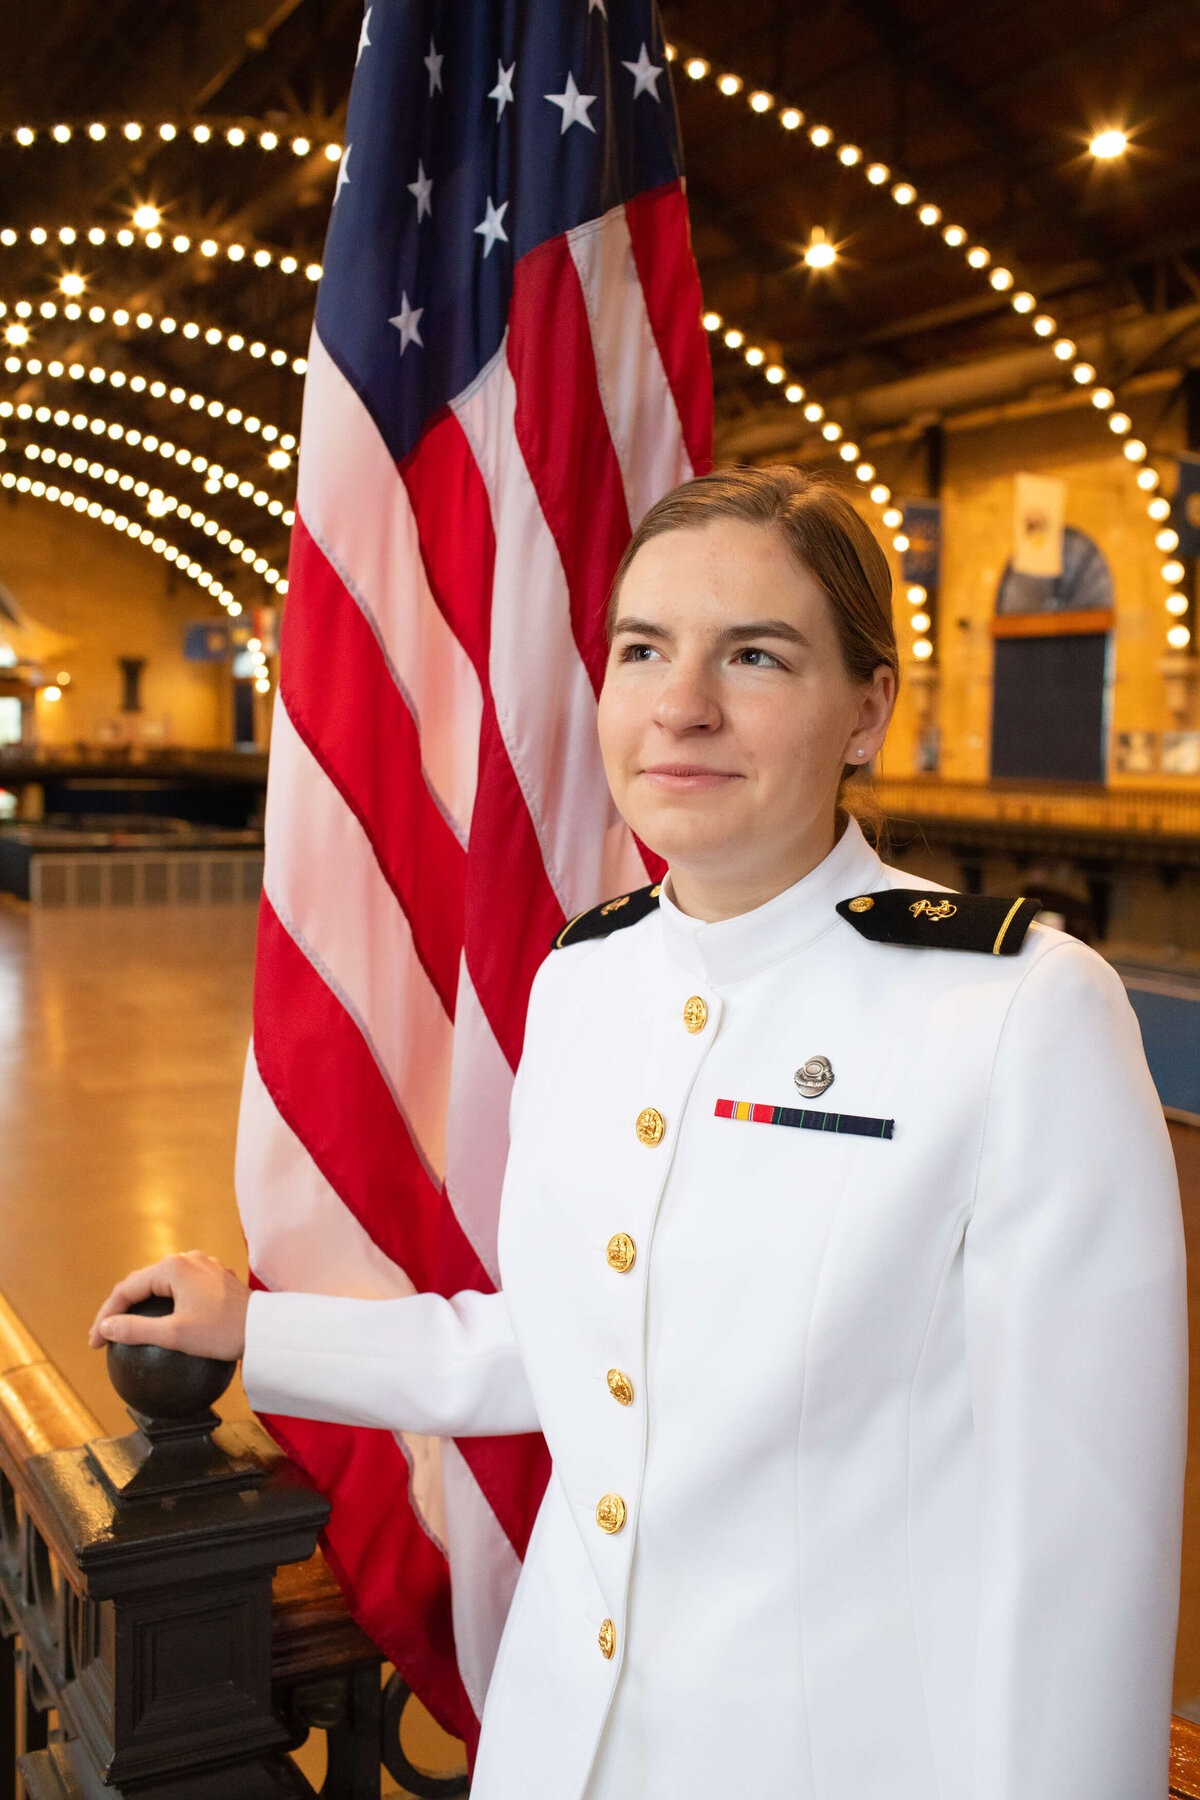 Woman Naval Academy graduate in white uniform with a flag.